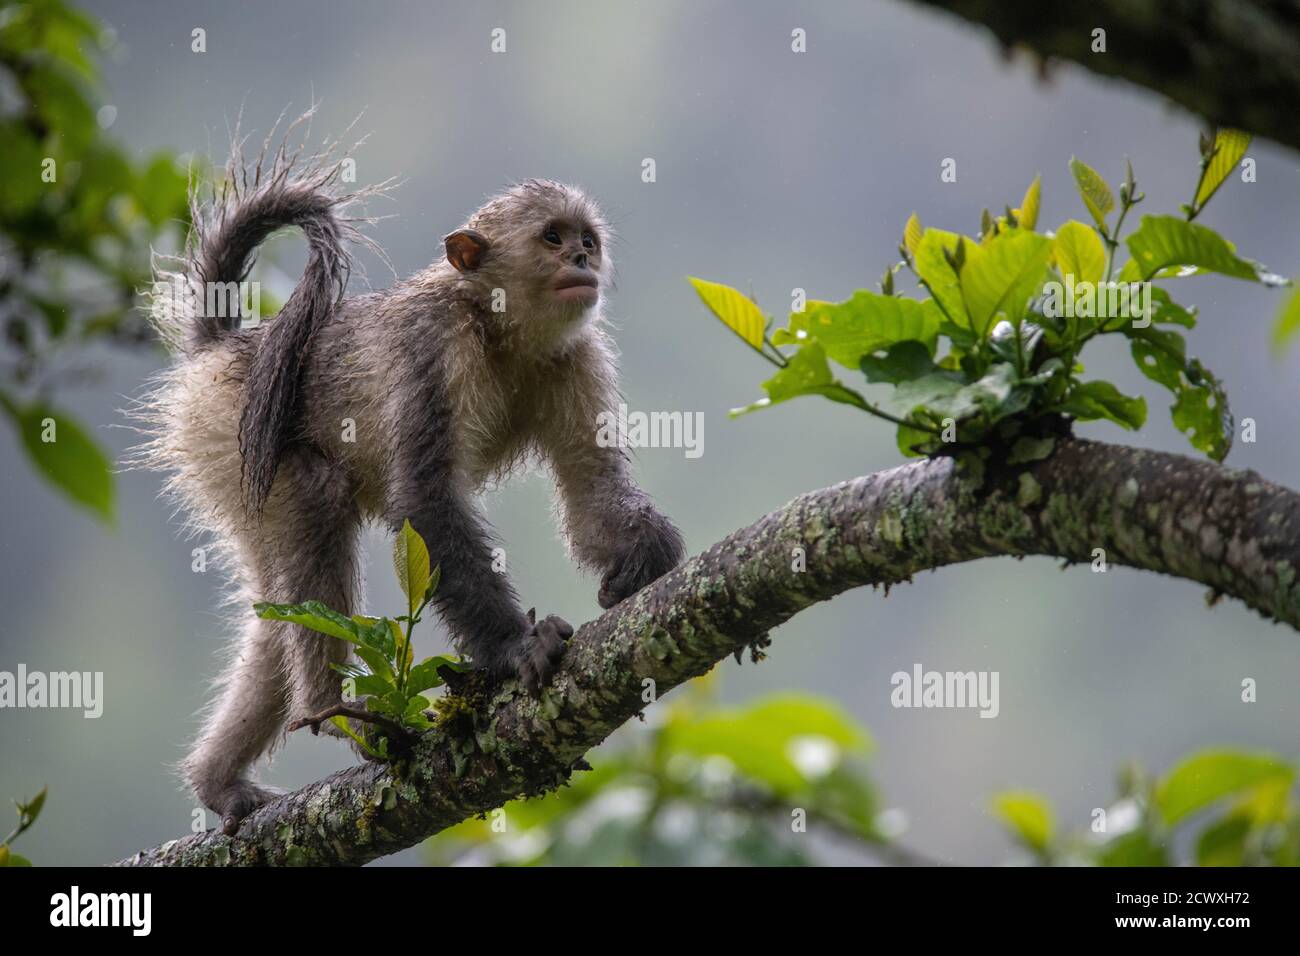 200930) -- KUNMING, Sept. 30, 2020 (Xinhua) -- A snub-nosed monkey is  pictured at the Yunnan Snub-nosed Monkey National Park in Shangri-La, Deqen  Tibetan Autonomous Prefecture, southwest China's Yunnan Province, May 23,